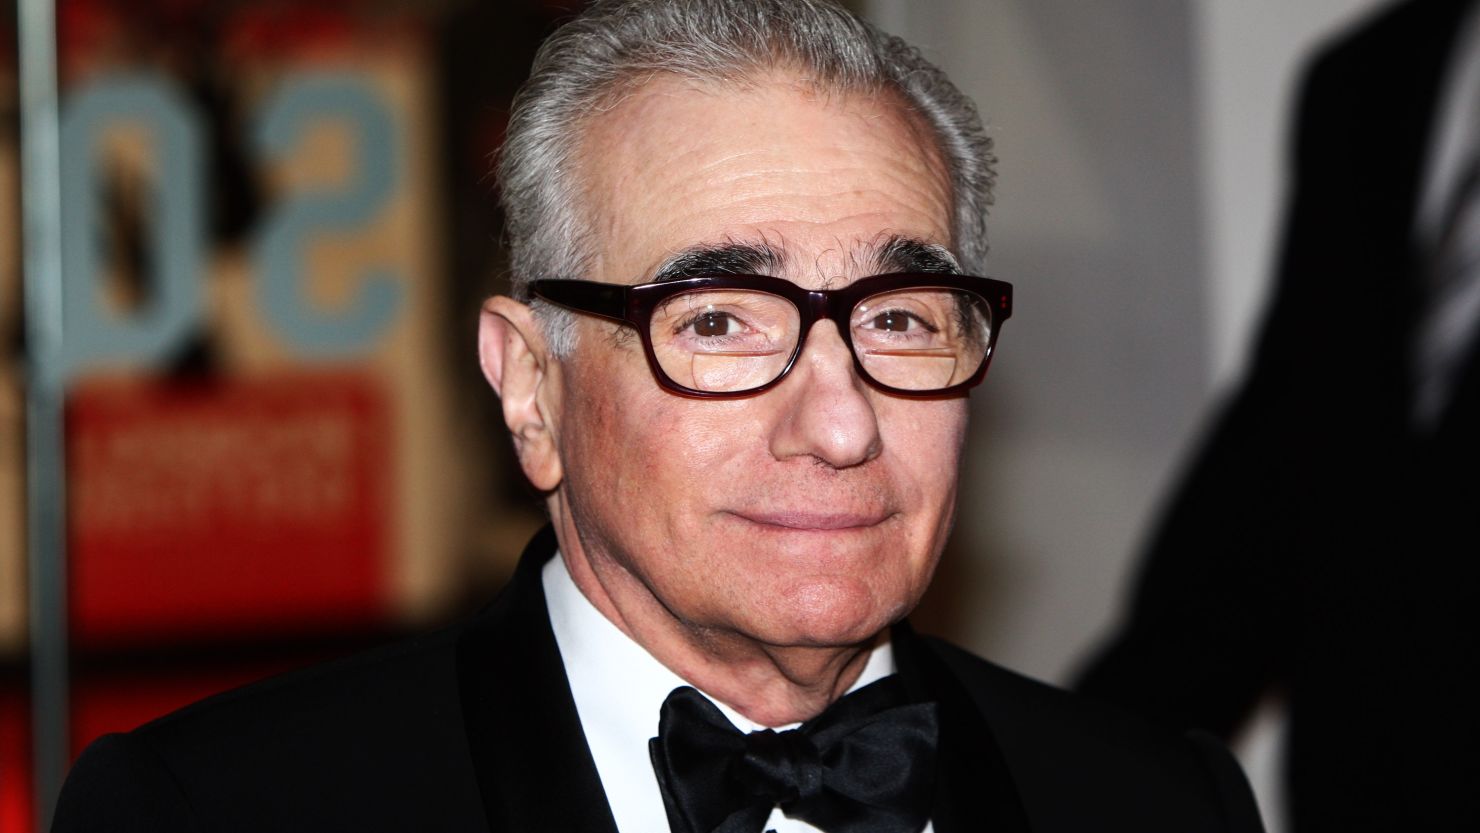 Martin Scorsese attends a Royal film performance of "Hugo" in London on November 28, 2011.